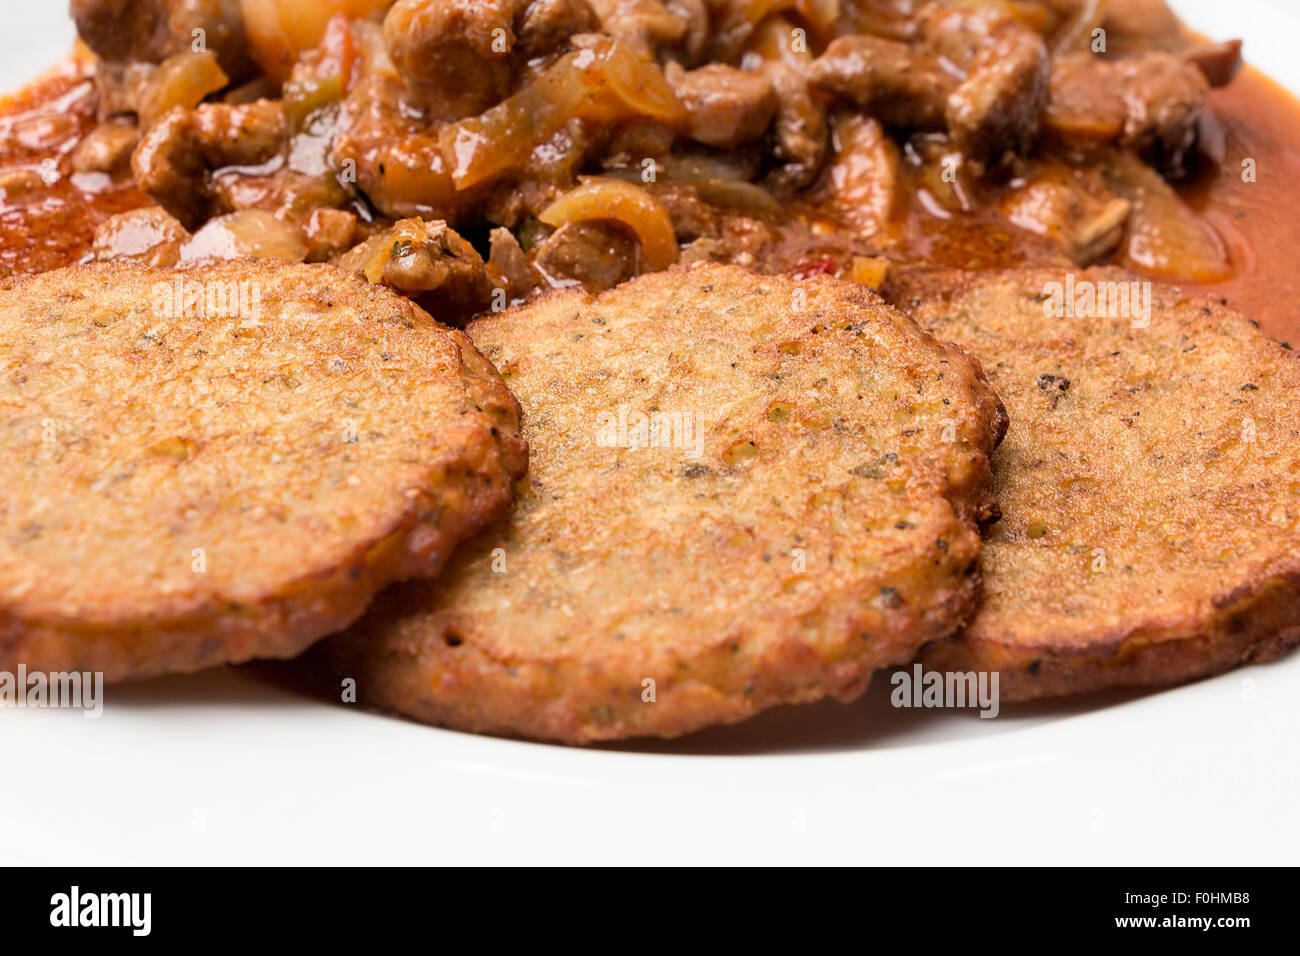 Potato pancakes with meat mixture, typical Czech or German meal or dish. Stock Photo